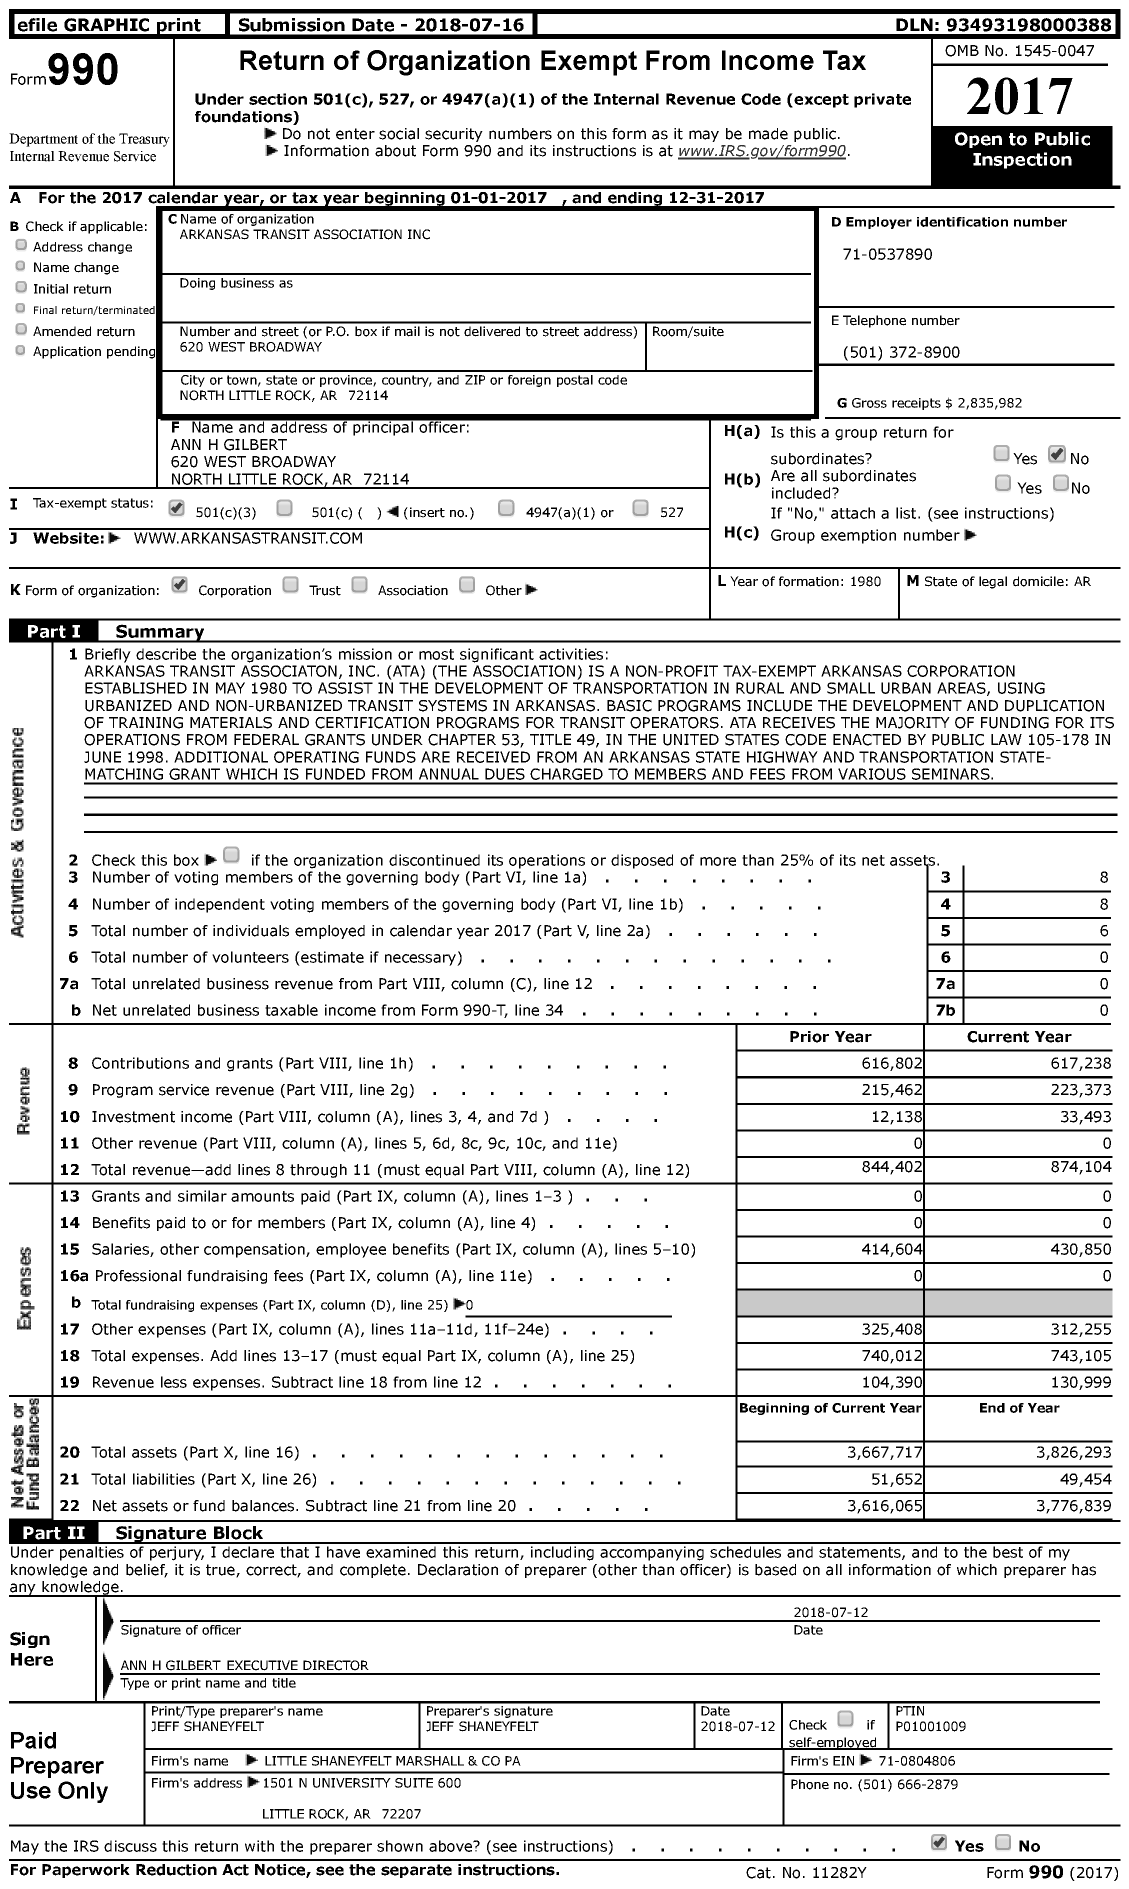 Image of first page of 2017 Form 990 for Arkansas Transit Association (ATA)